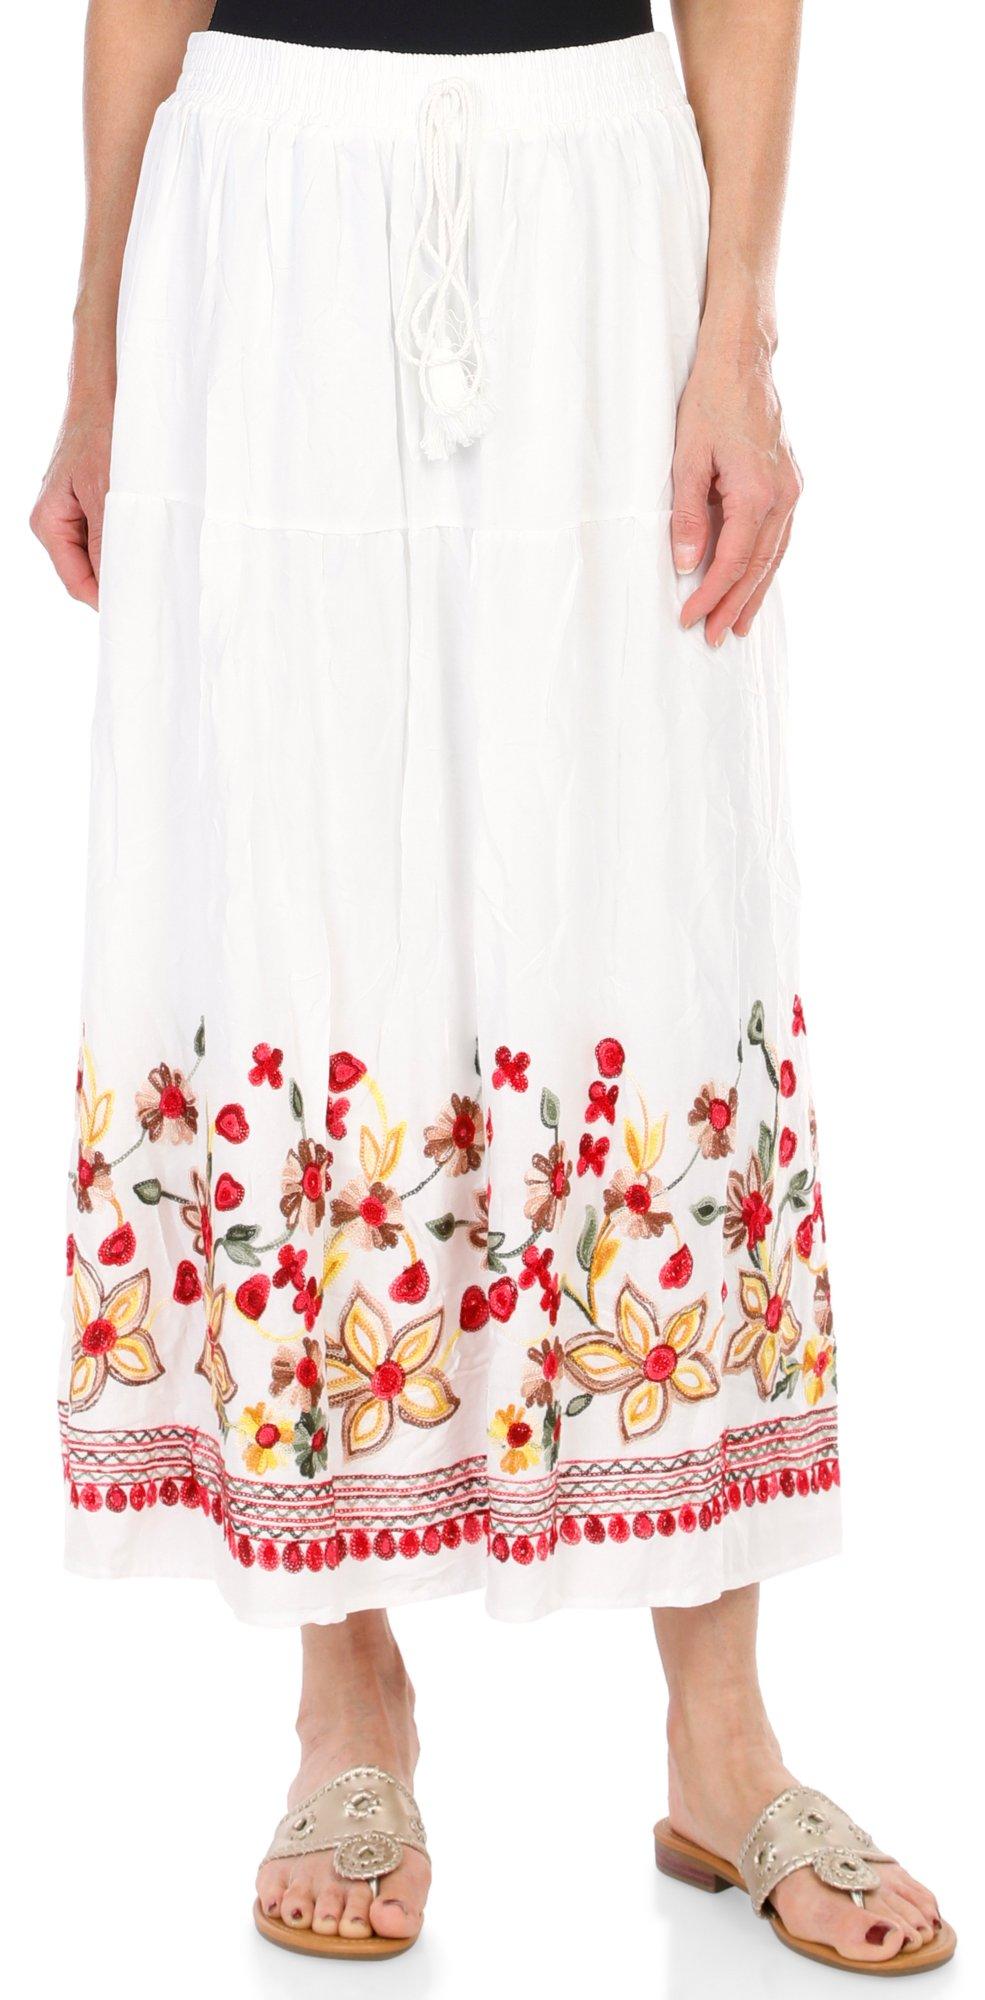 Women's Embroidered Floral Maxi Skirt